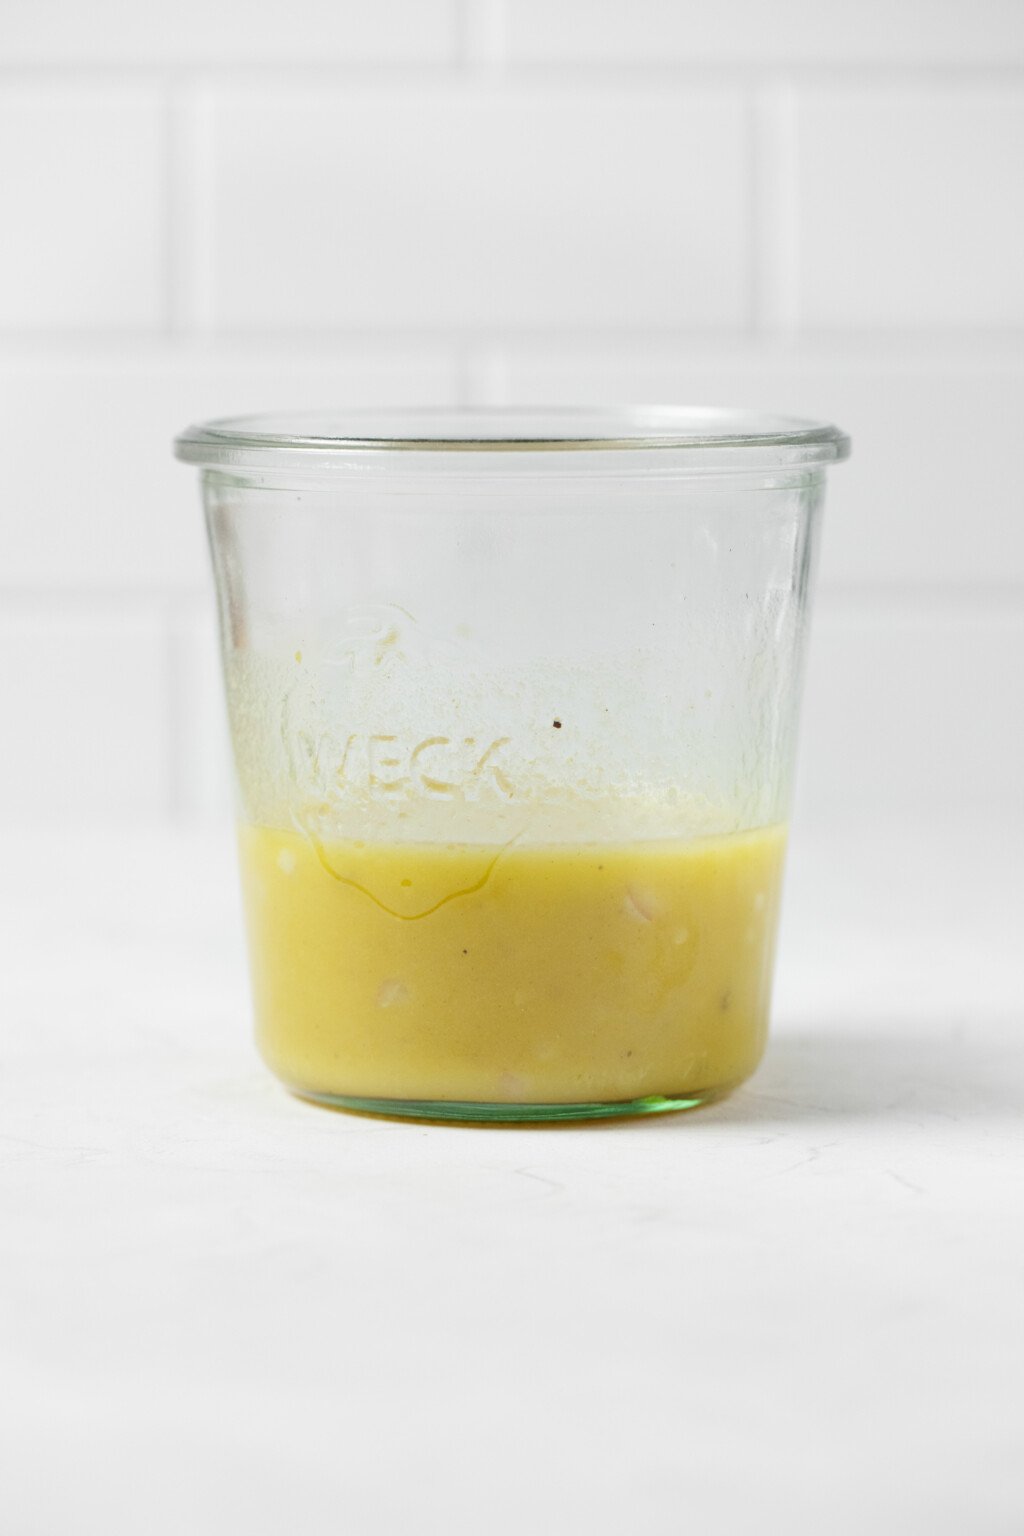 A Weck mason jar, containing a creamy emulsified vinaigrette, rests on a white surface. There's a white tiled surface in the background.